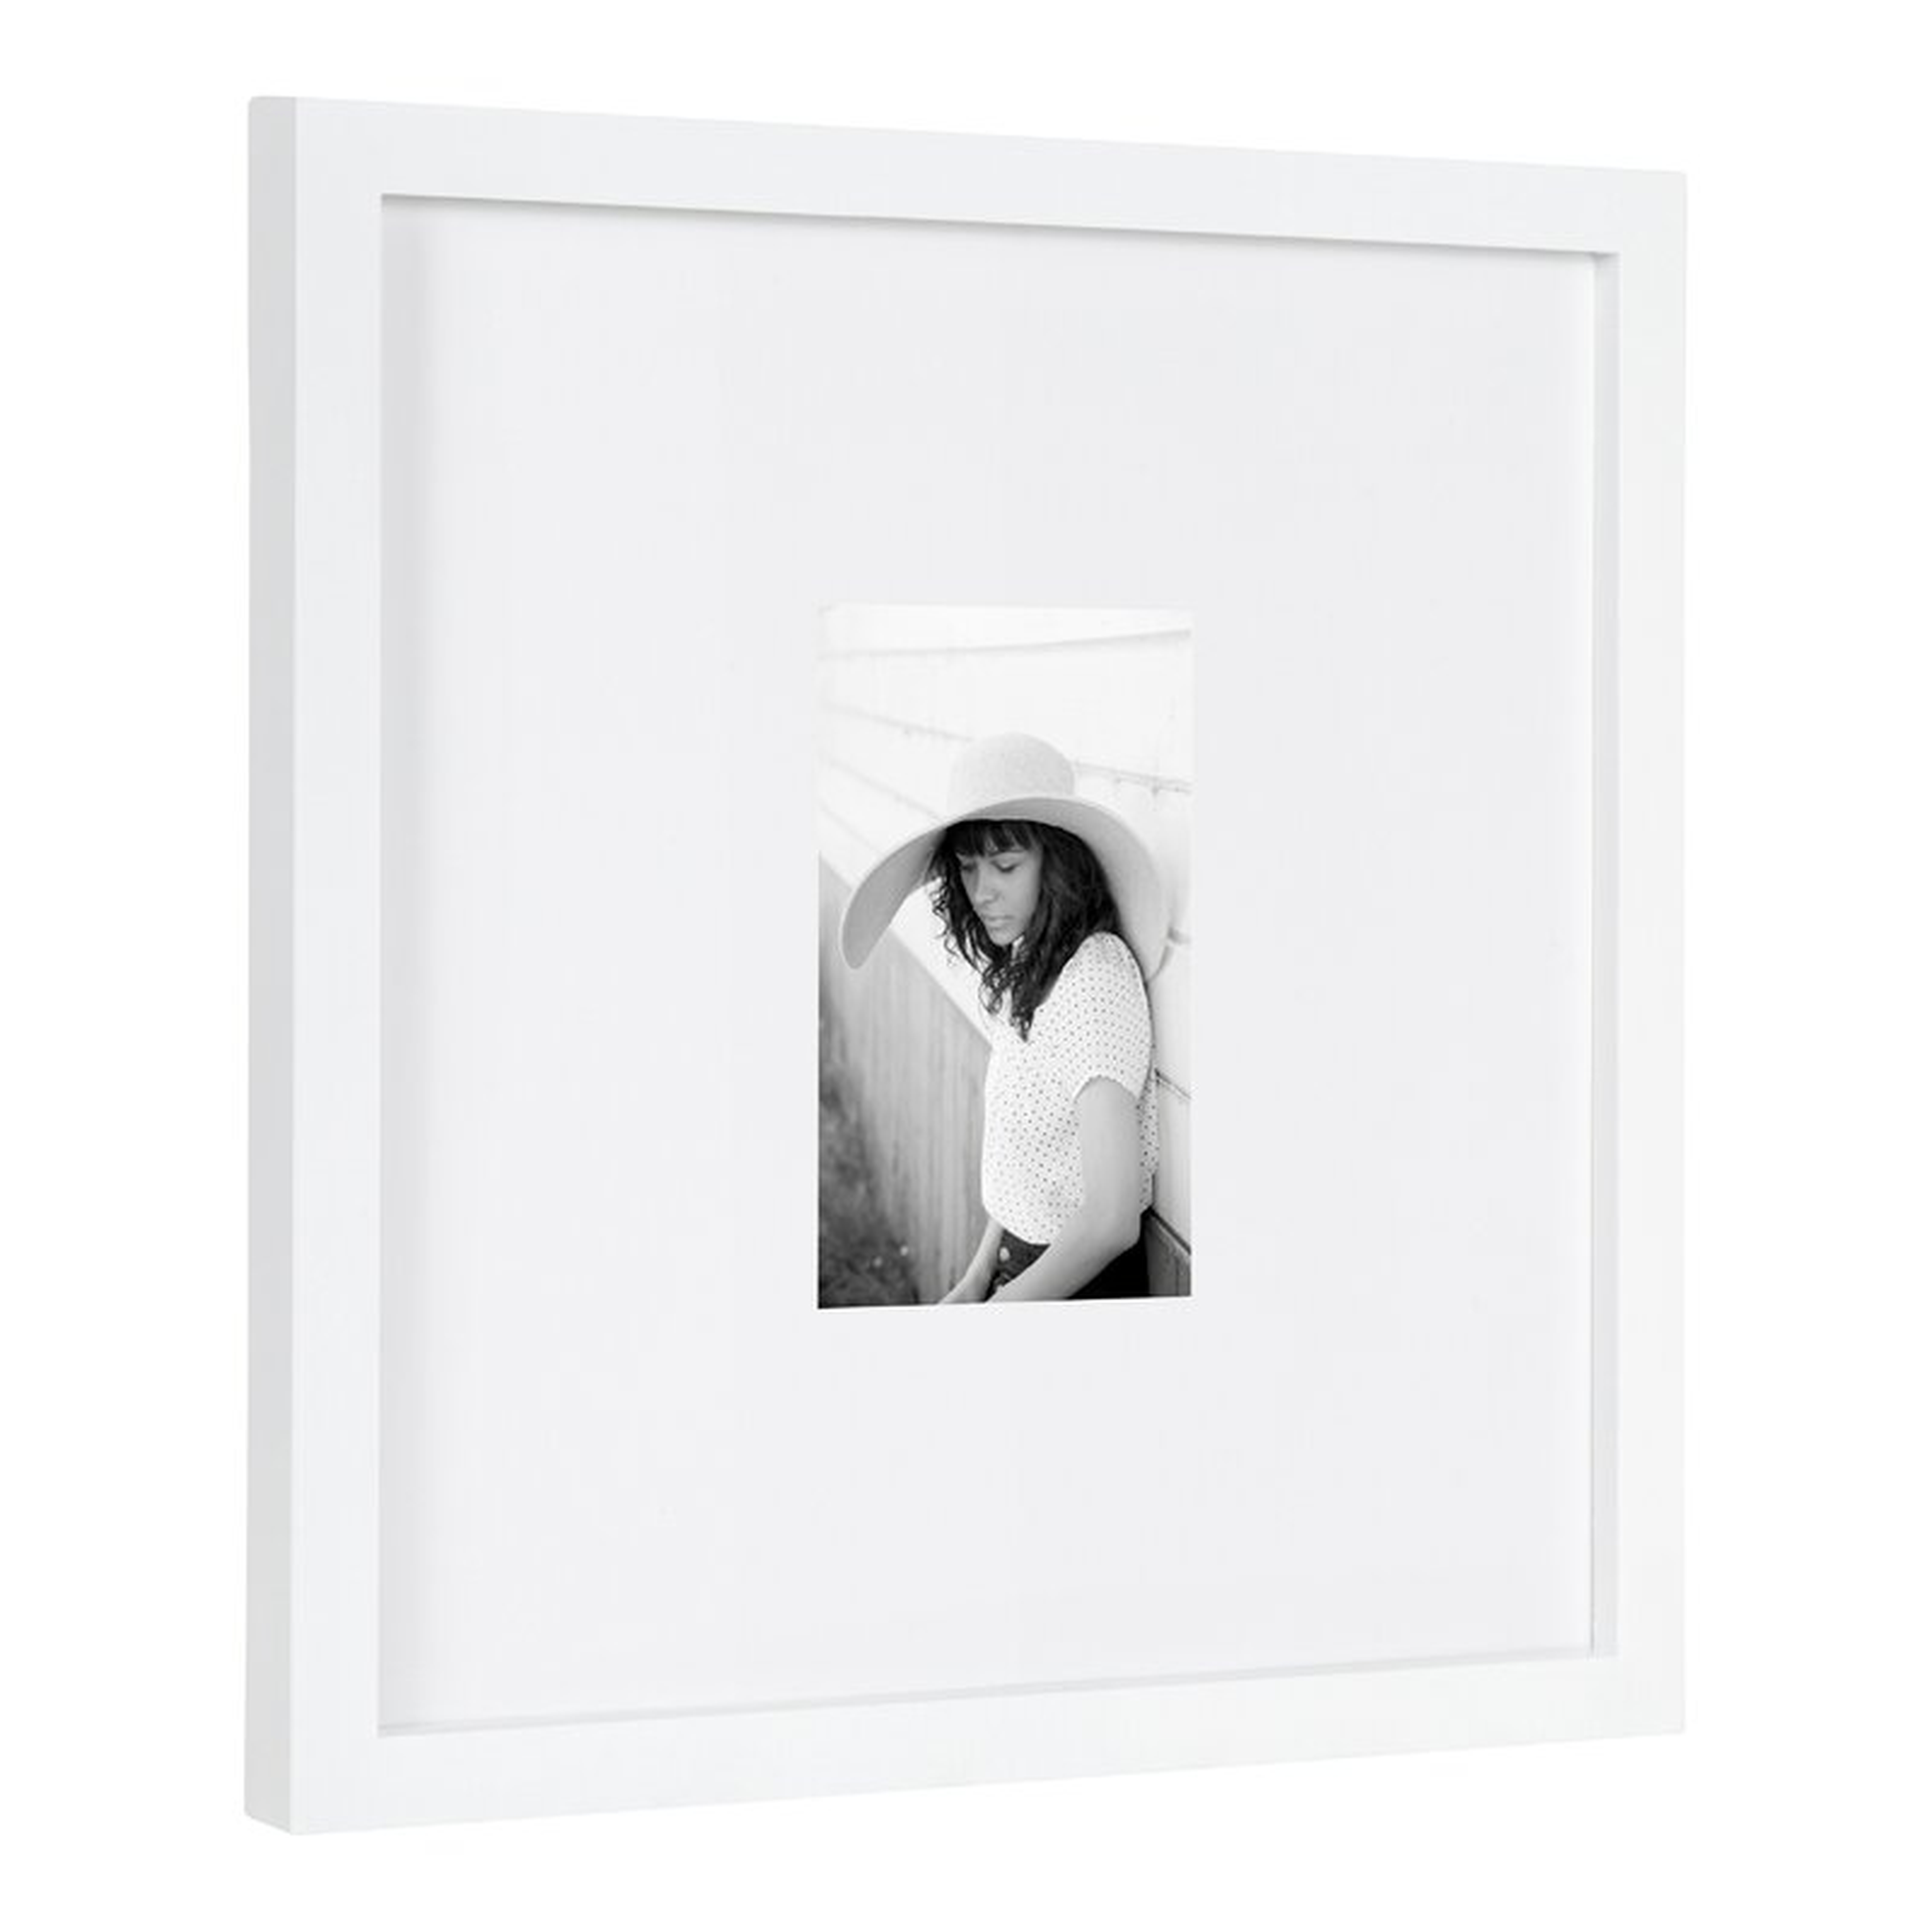 Comerfo Gallery Wood Picture Frame - Birch Lane